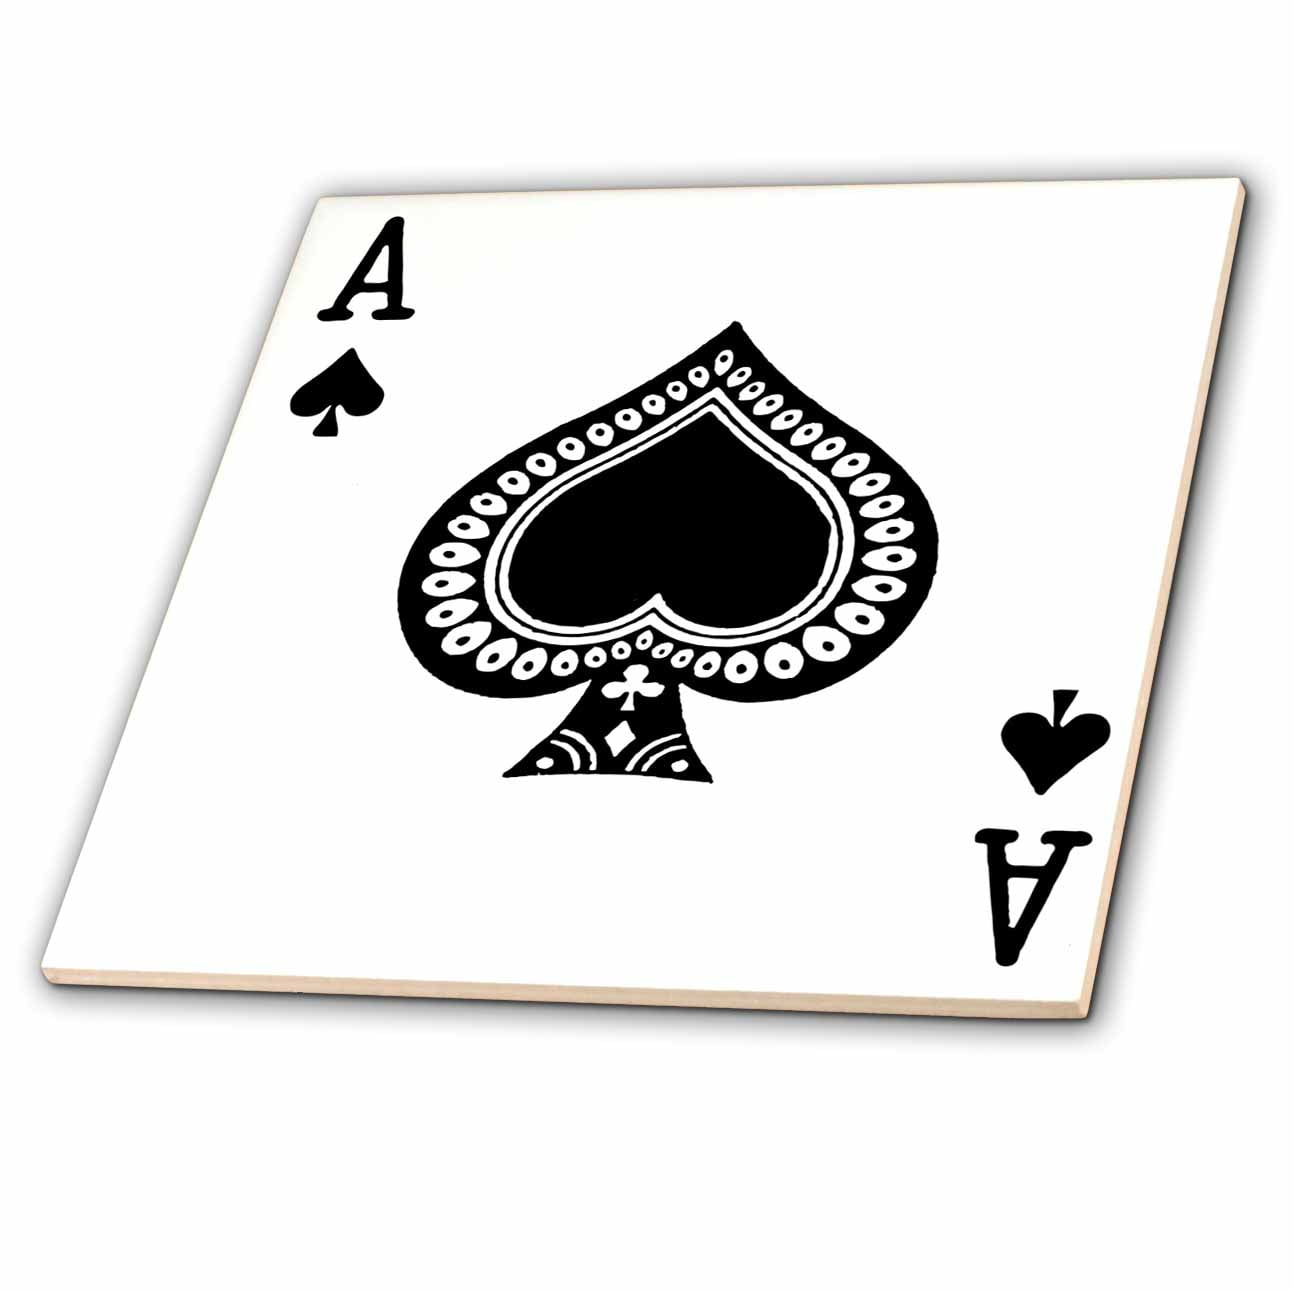 12-Inch Ceramic Tile ct_76552_4 3dRose Ace of Spades Playing Card Gifts for Cards Game Players of Poker Bridge Games Black Spade Suit 